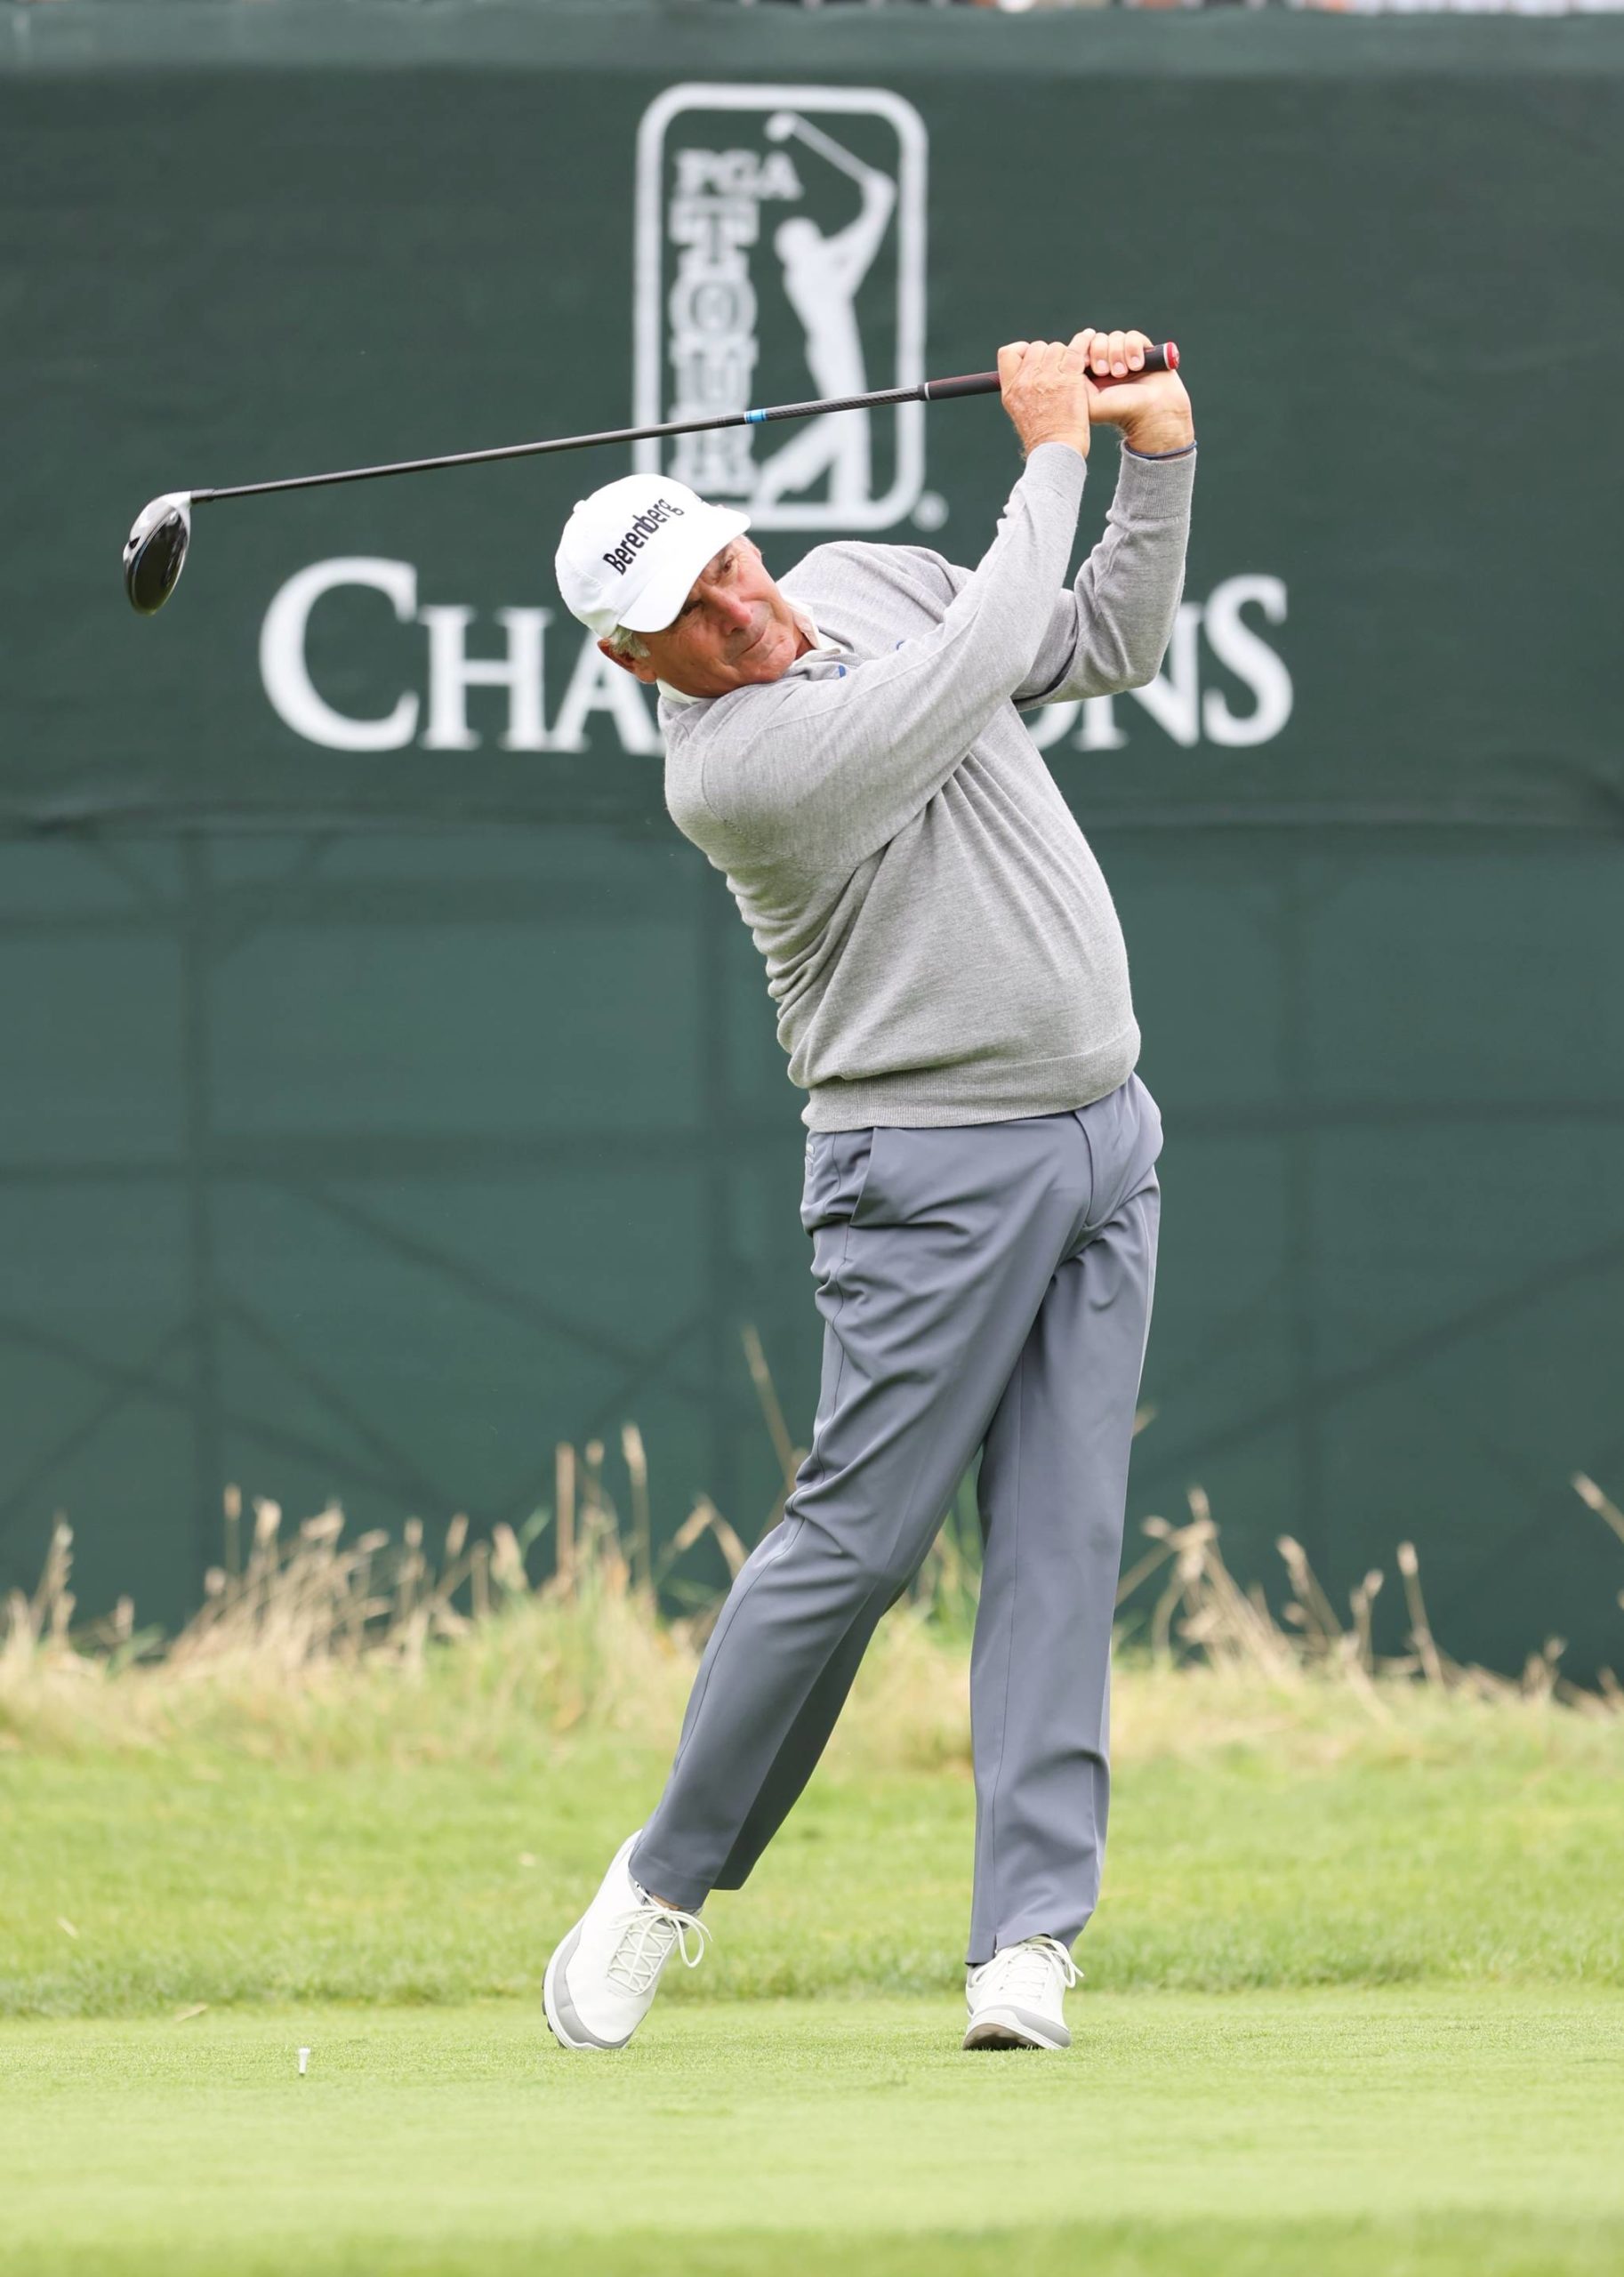 Fred Couples, who tied for 26th. Photo courtesy of Jim Nicholson